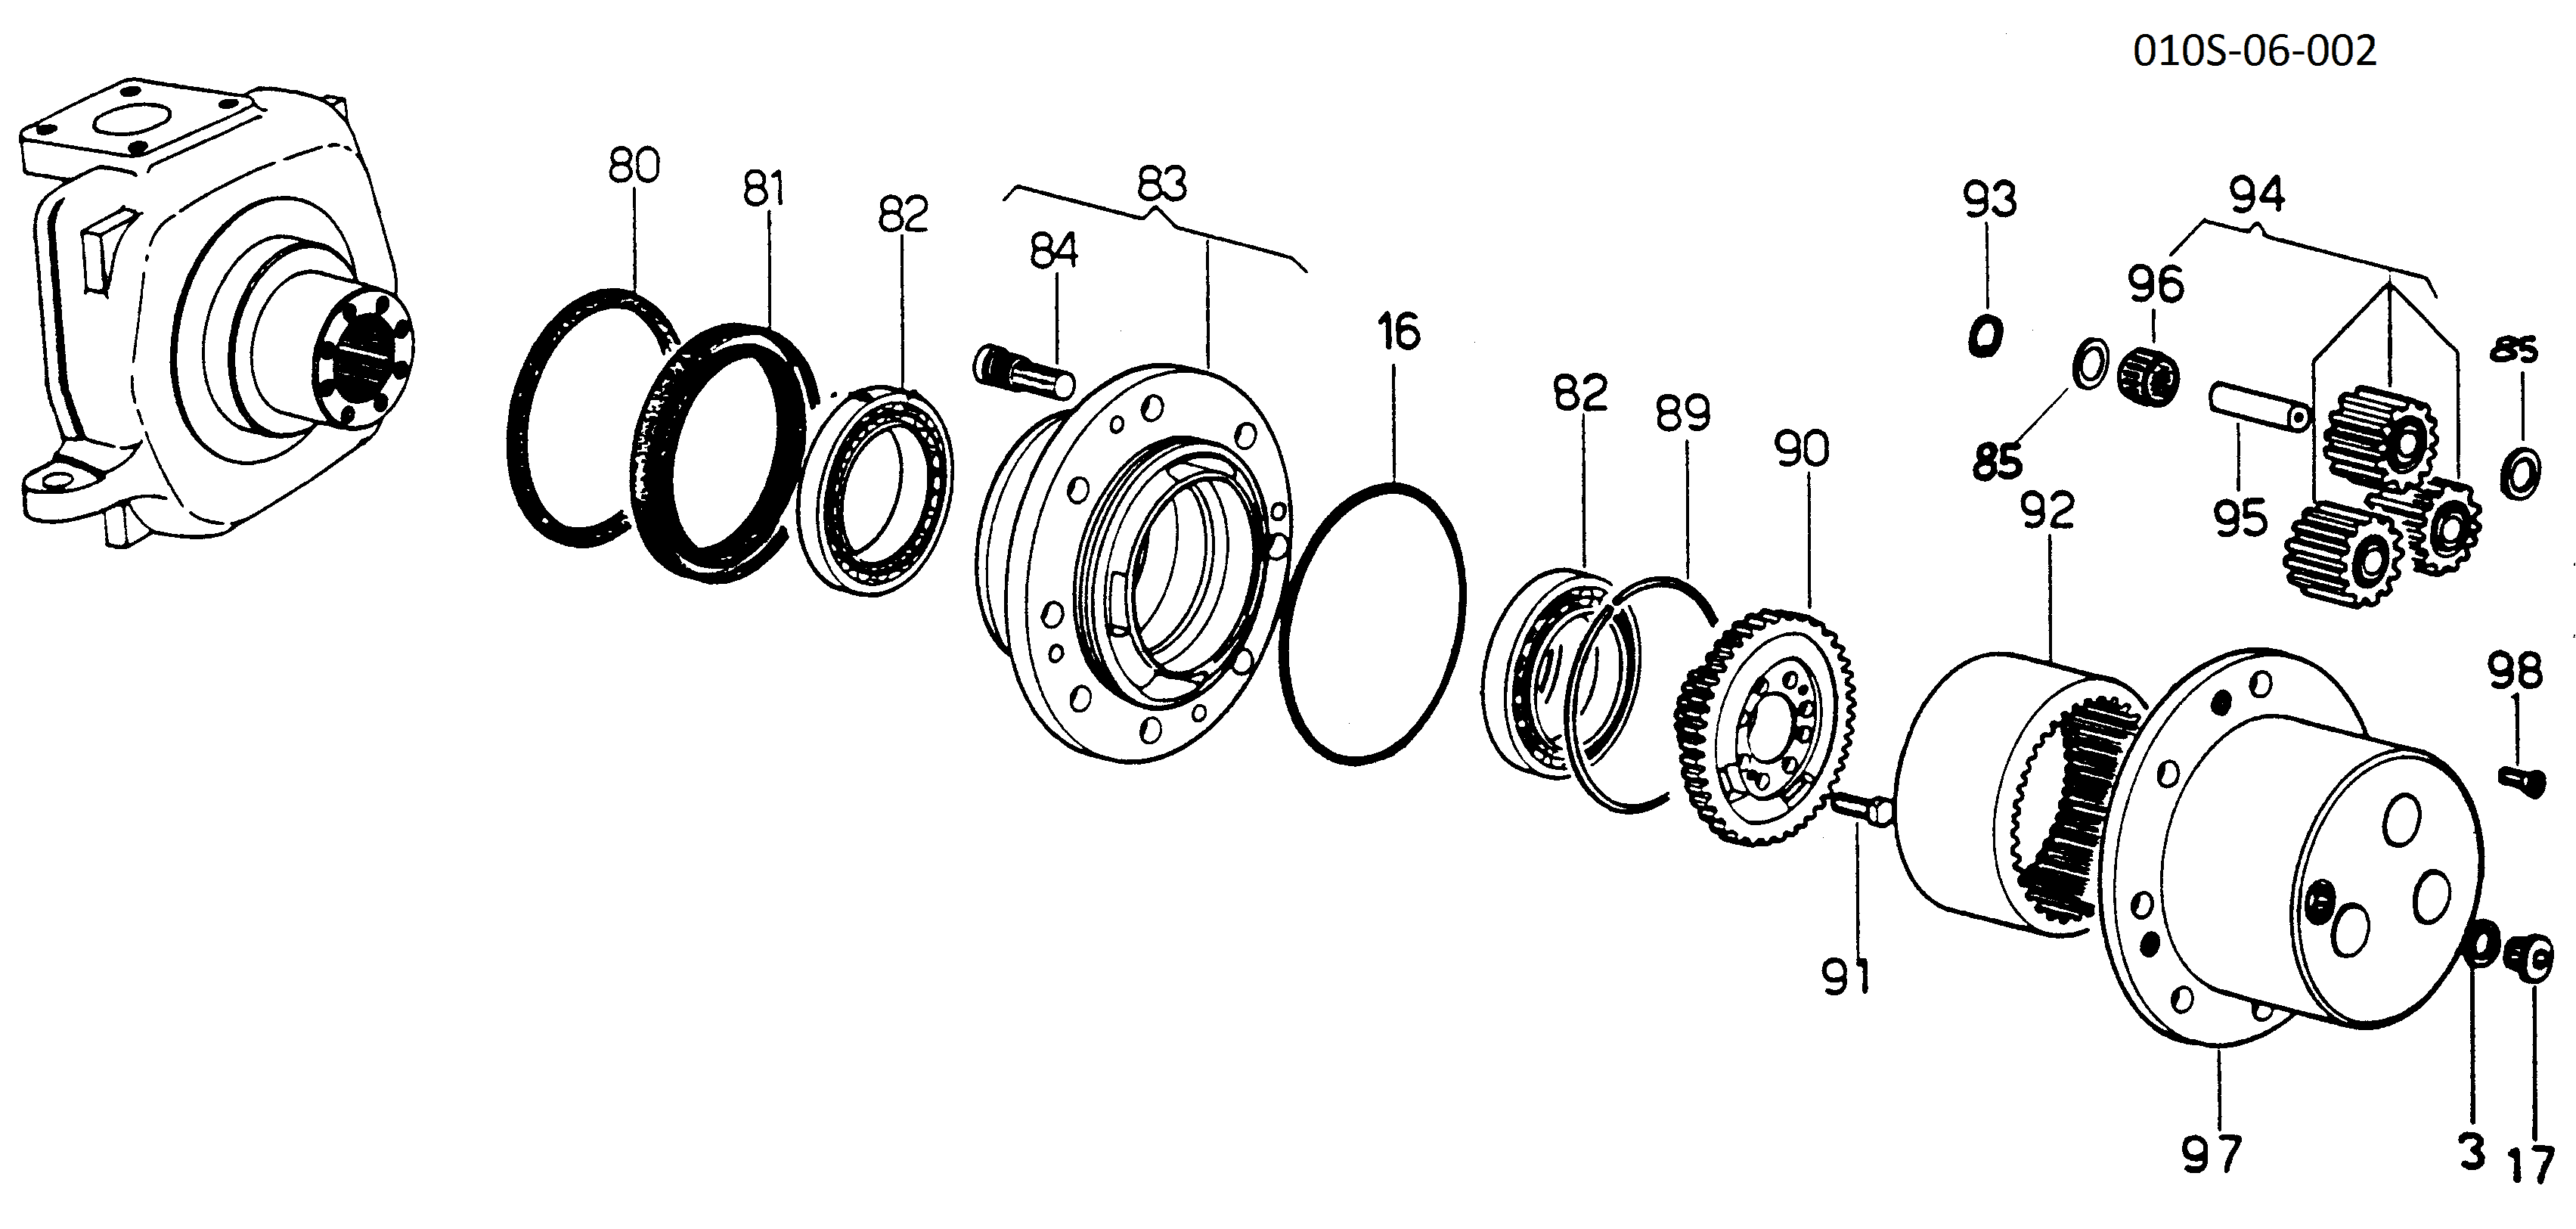 drawing for CNH NEW HOLLAND 84021778 - WHEEL HUB